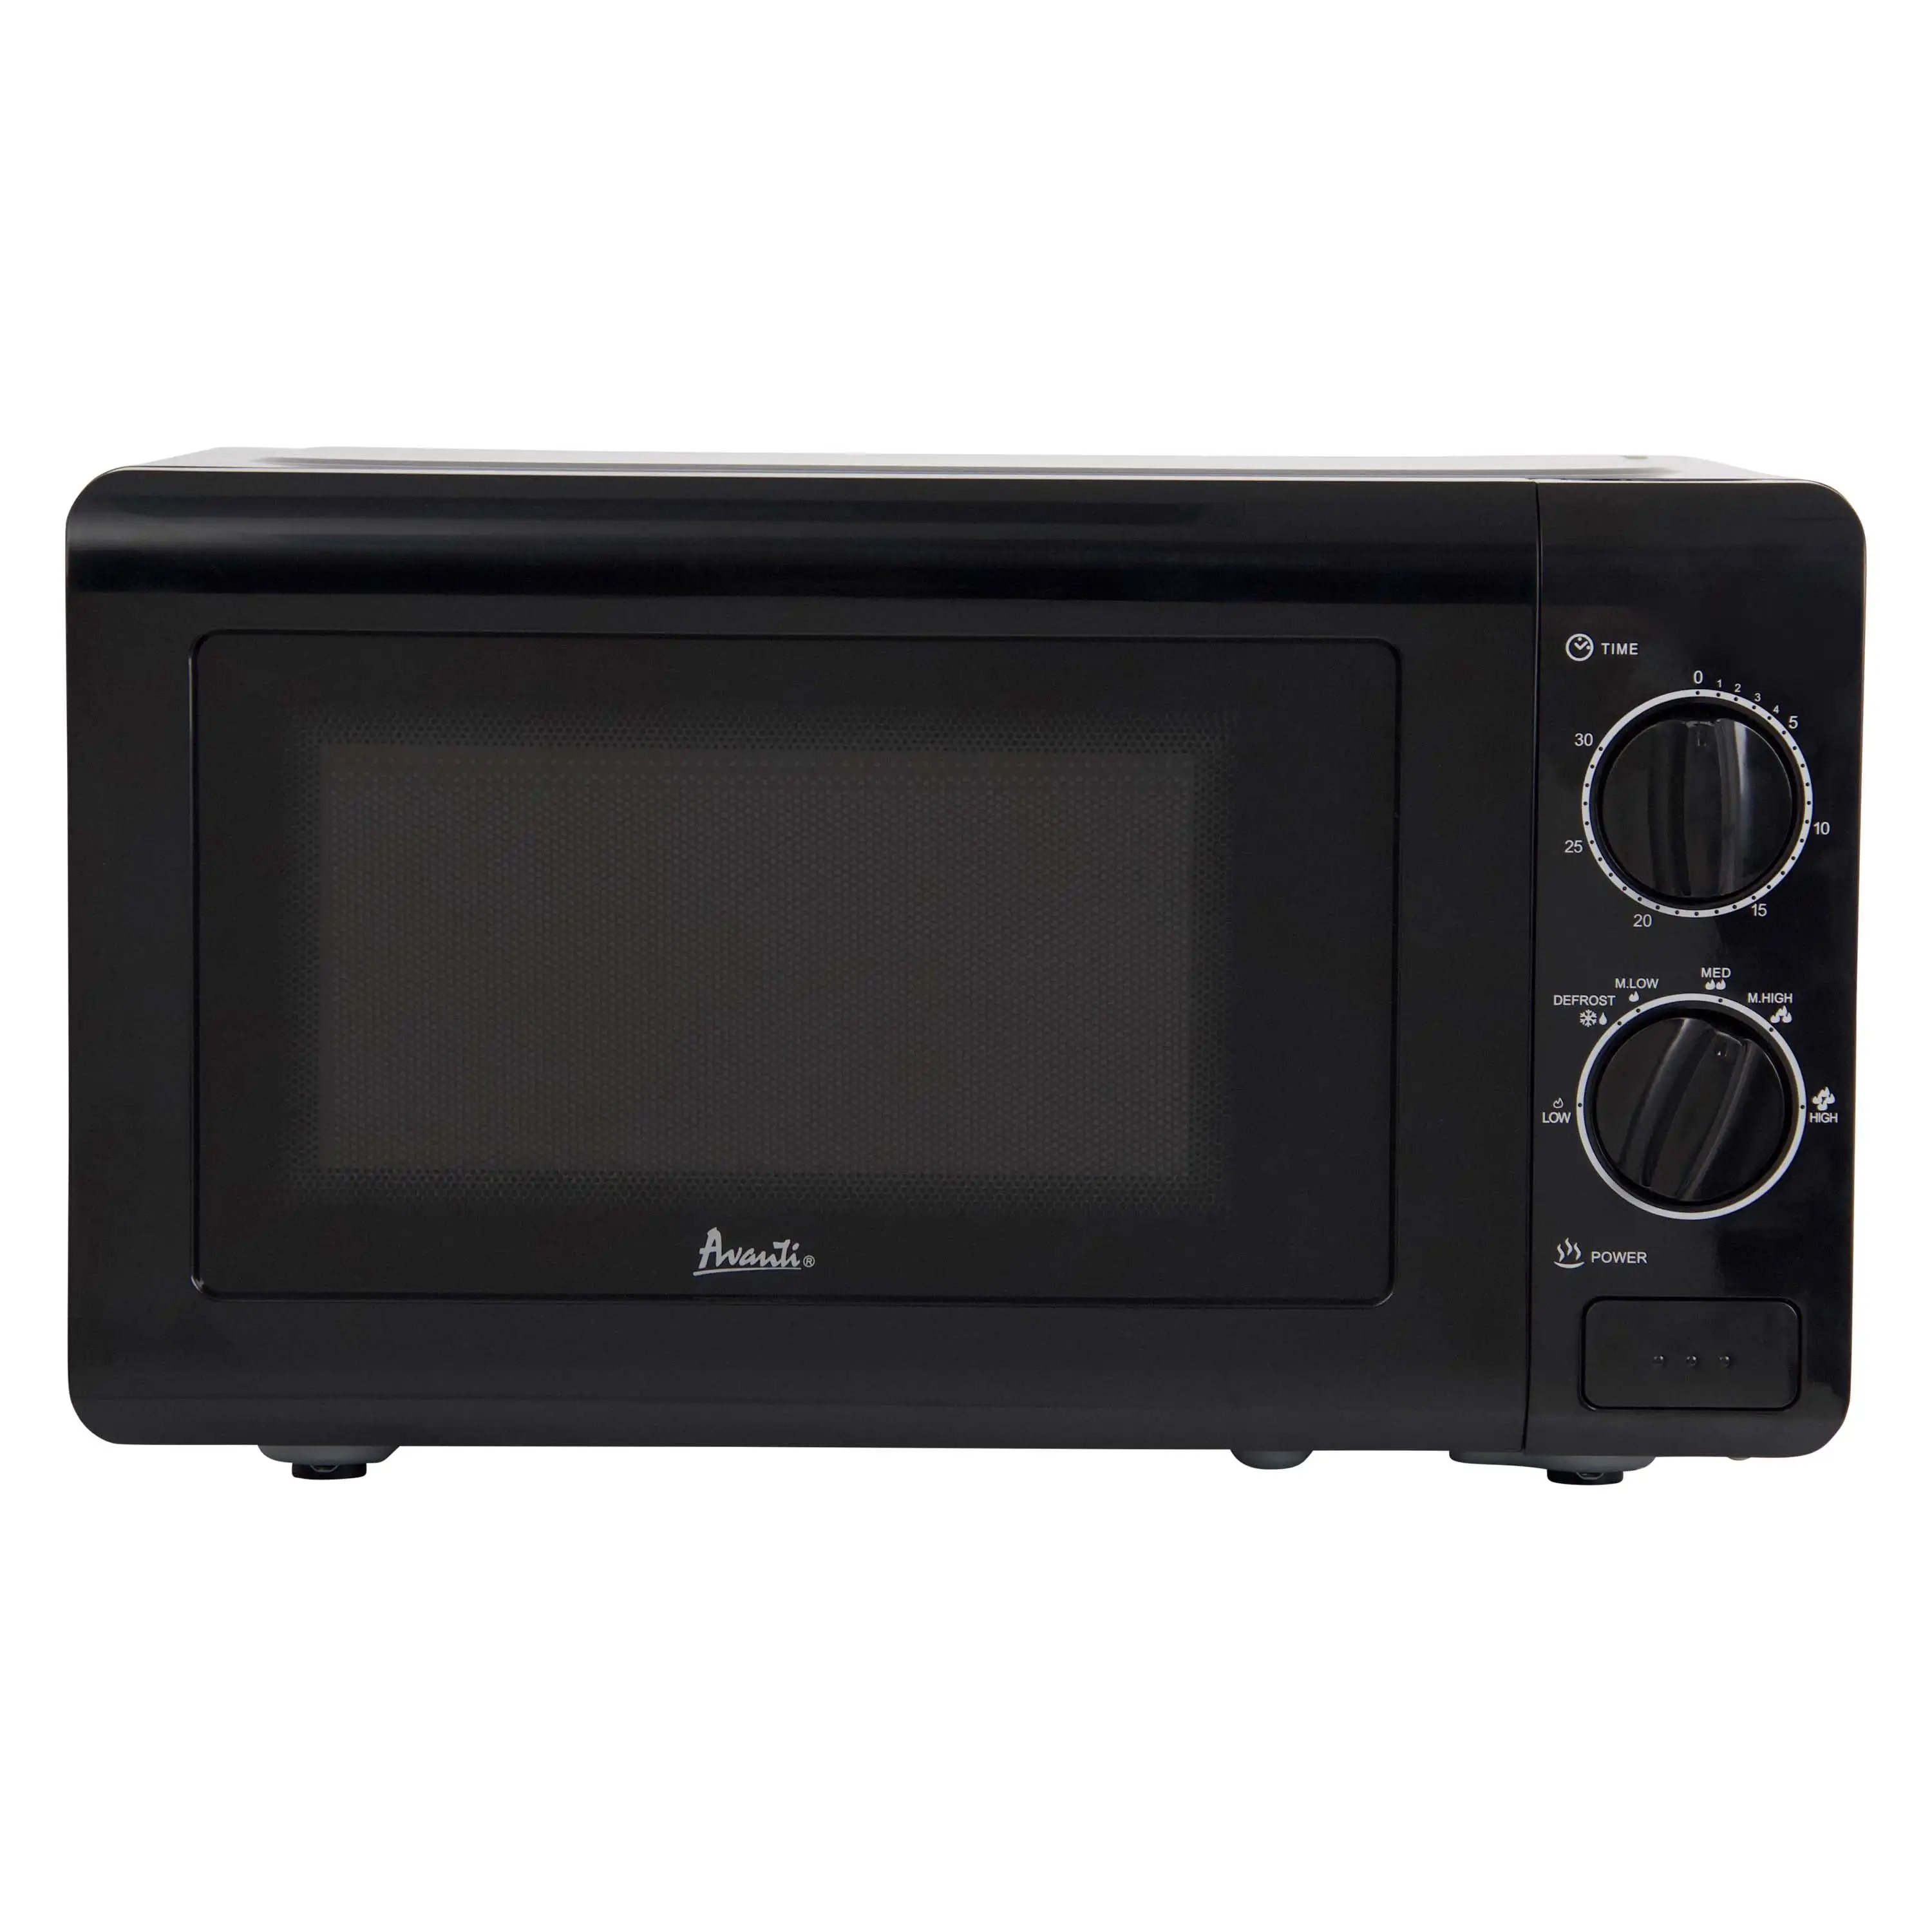 Microwave Oven with Mechanical Dials, 0.7 cu. ft., in Black